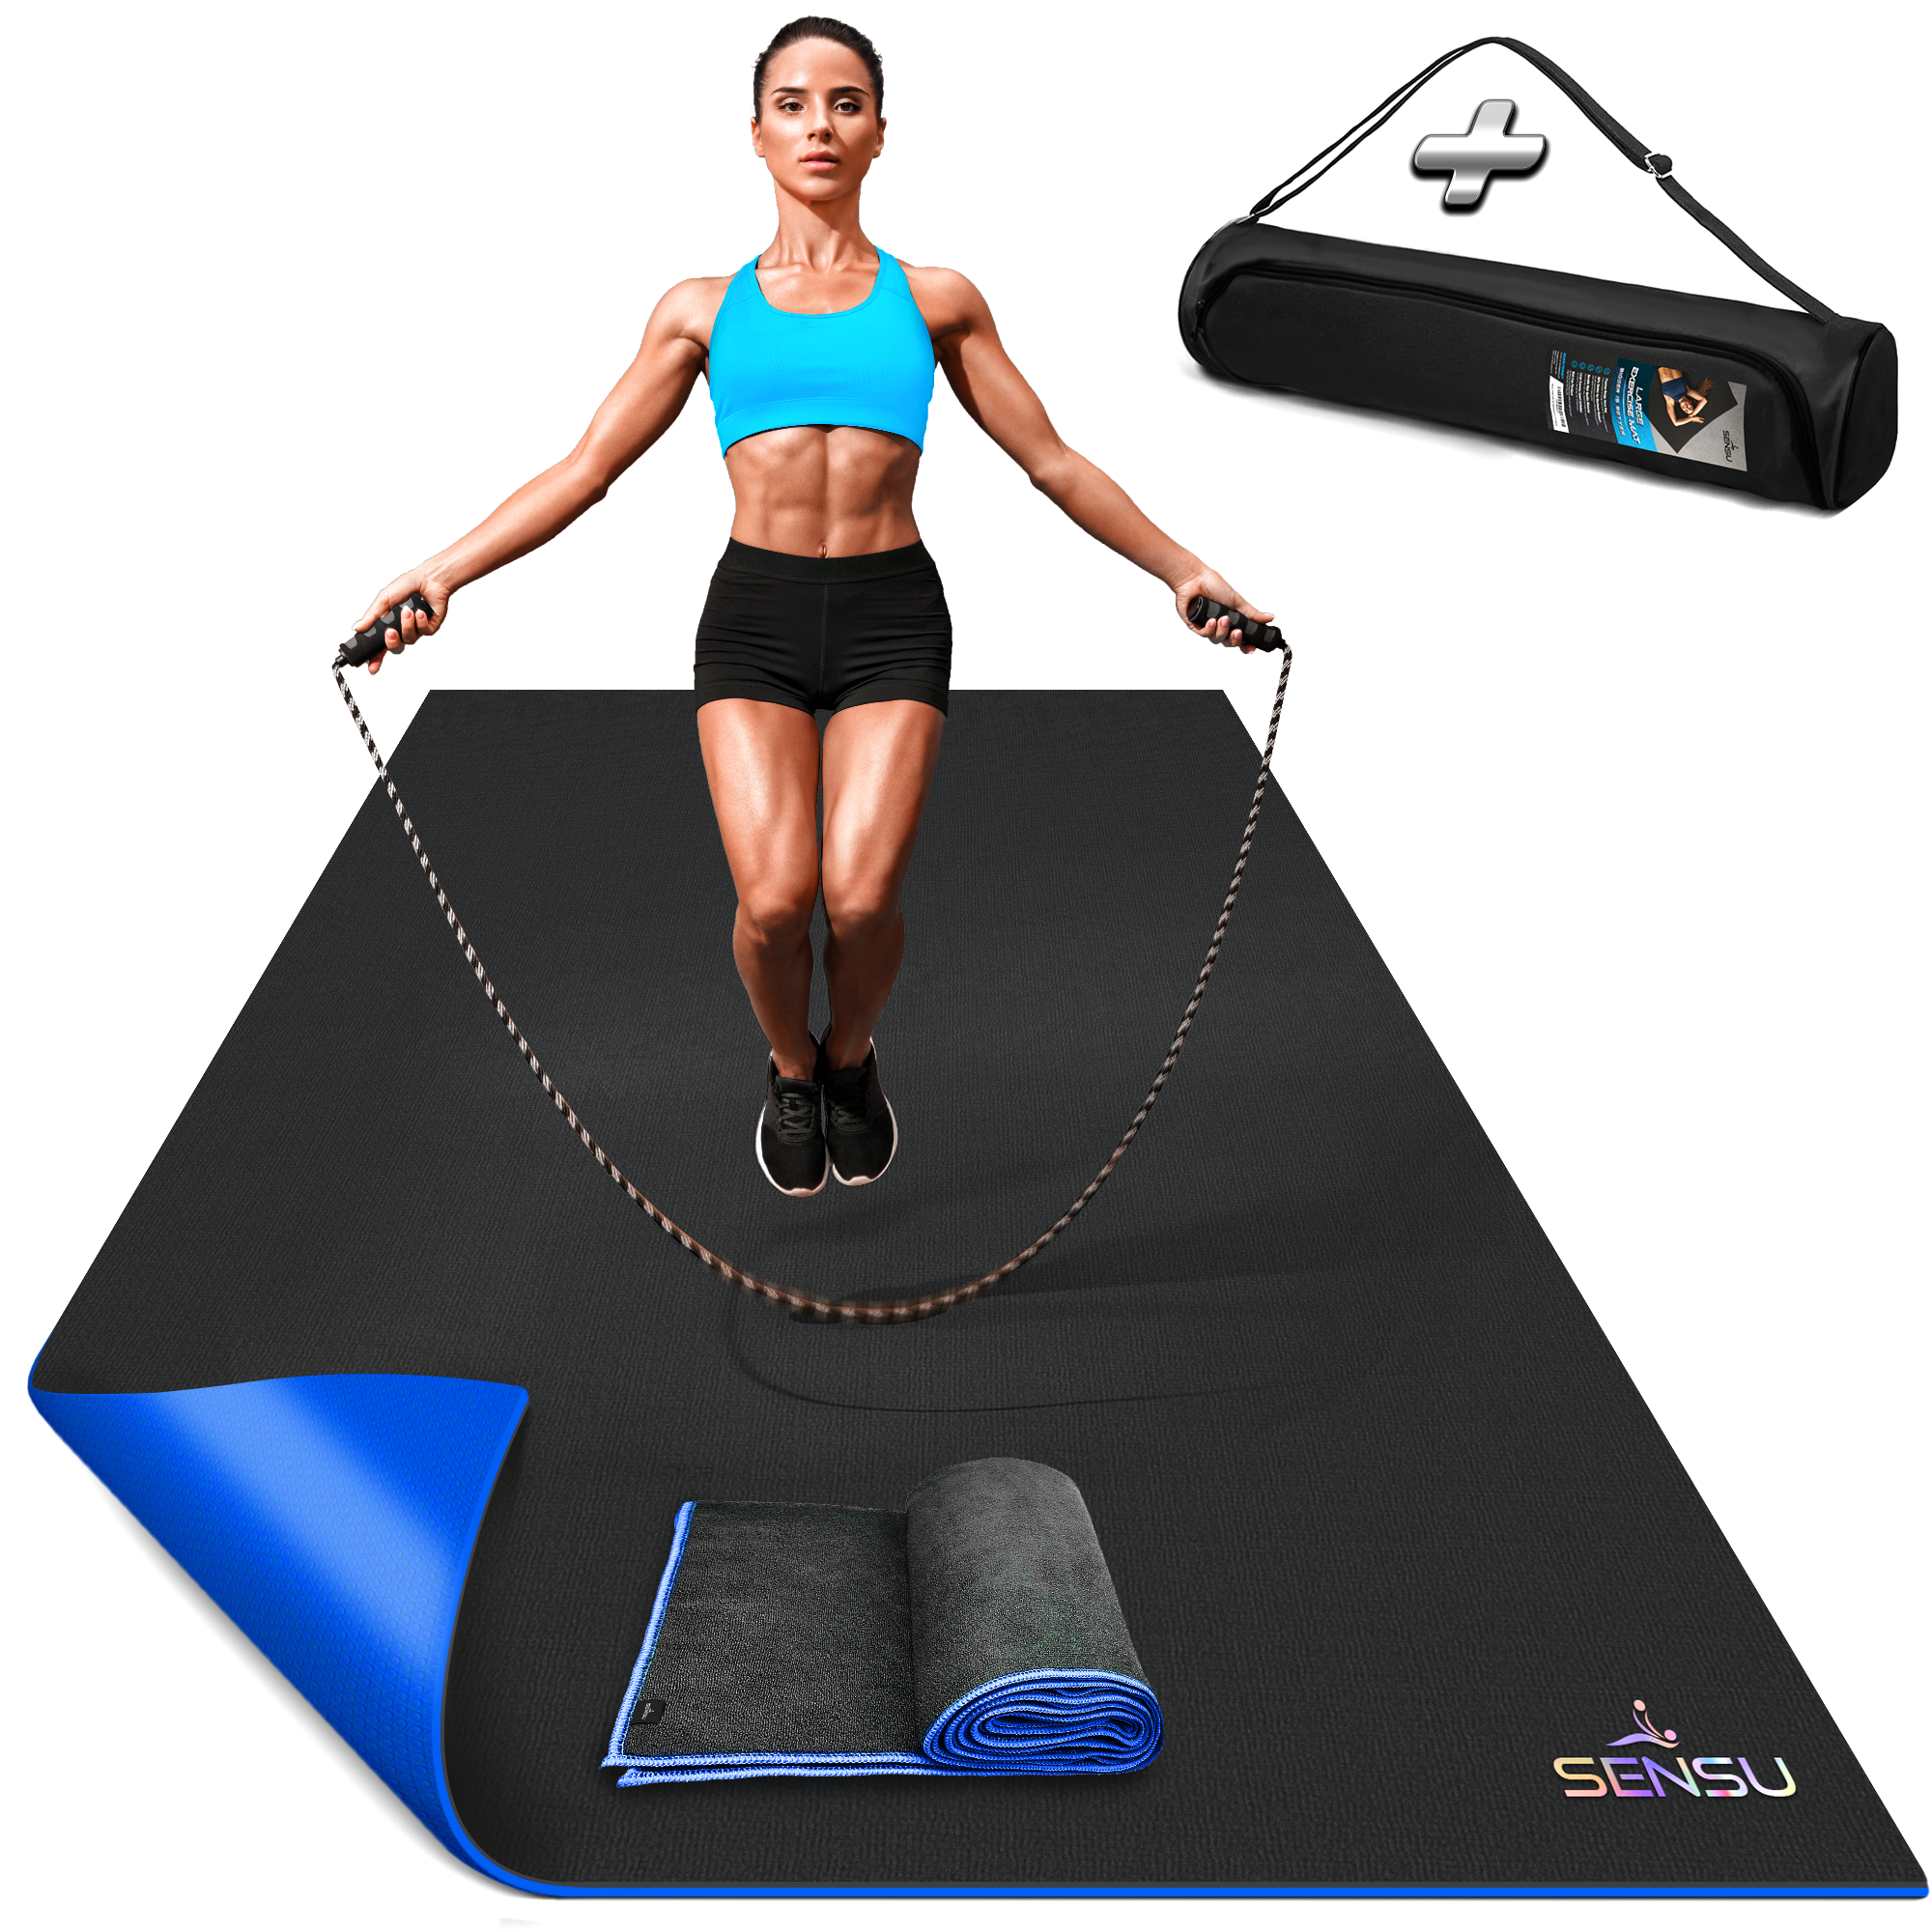 Sensu Large Exercise Mat – 6’ x 4’ x 8.5mm Extra Thick Workout Mats for Home Gym Flooring - Perfect for Jump Rope, Weights, Cardio and Fitness–